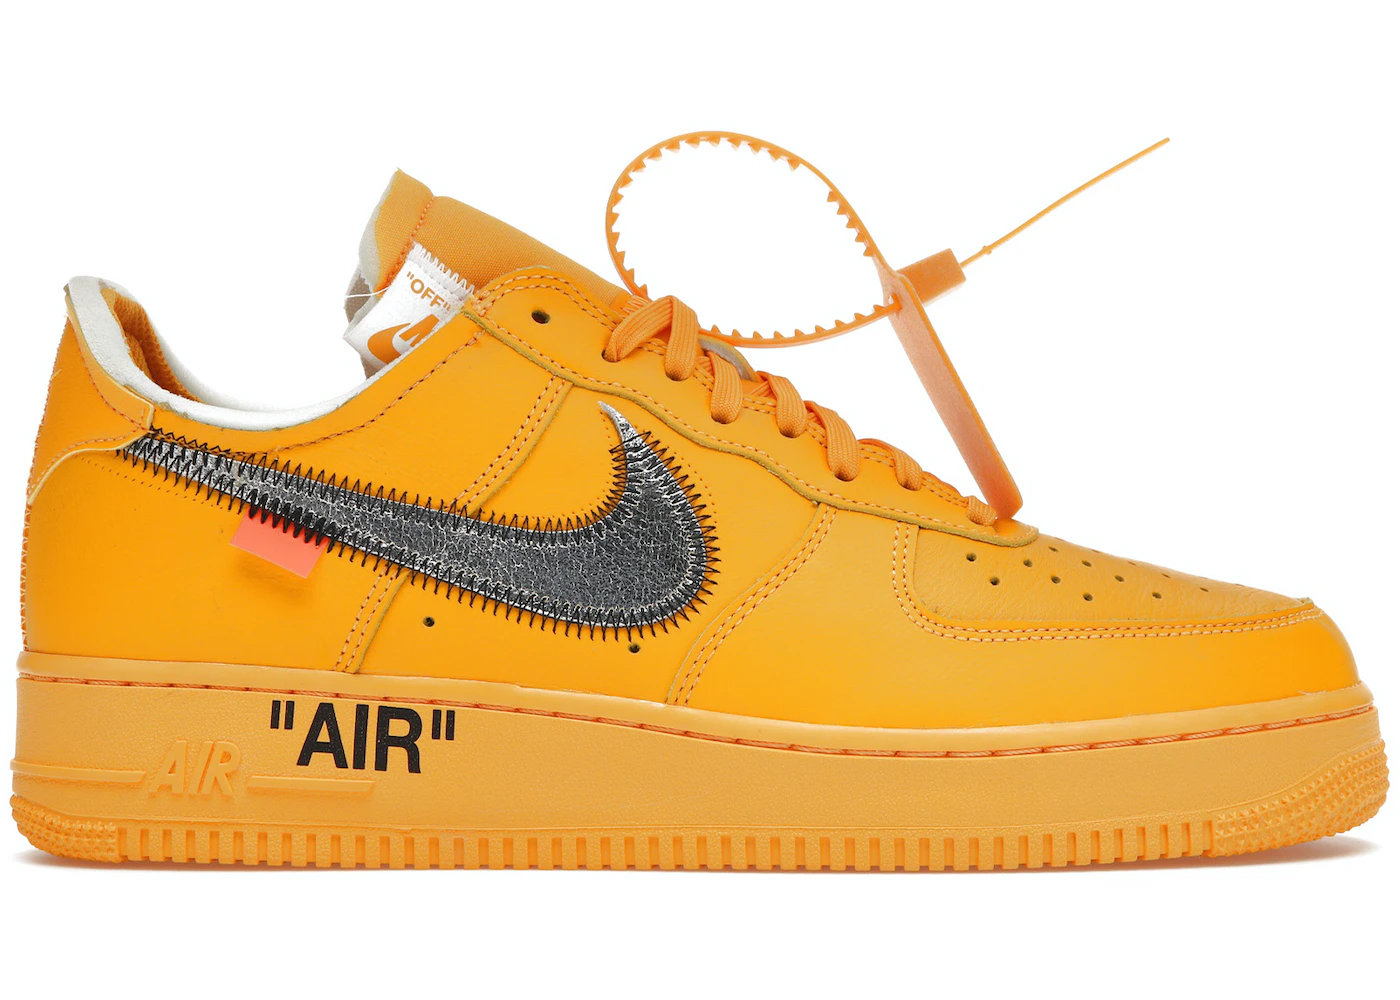 Nike Air Force 1 Low Off White University Gold Shoes Size 10